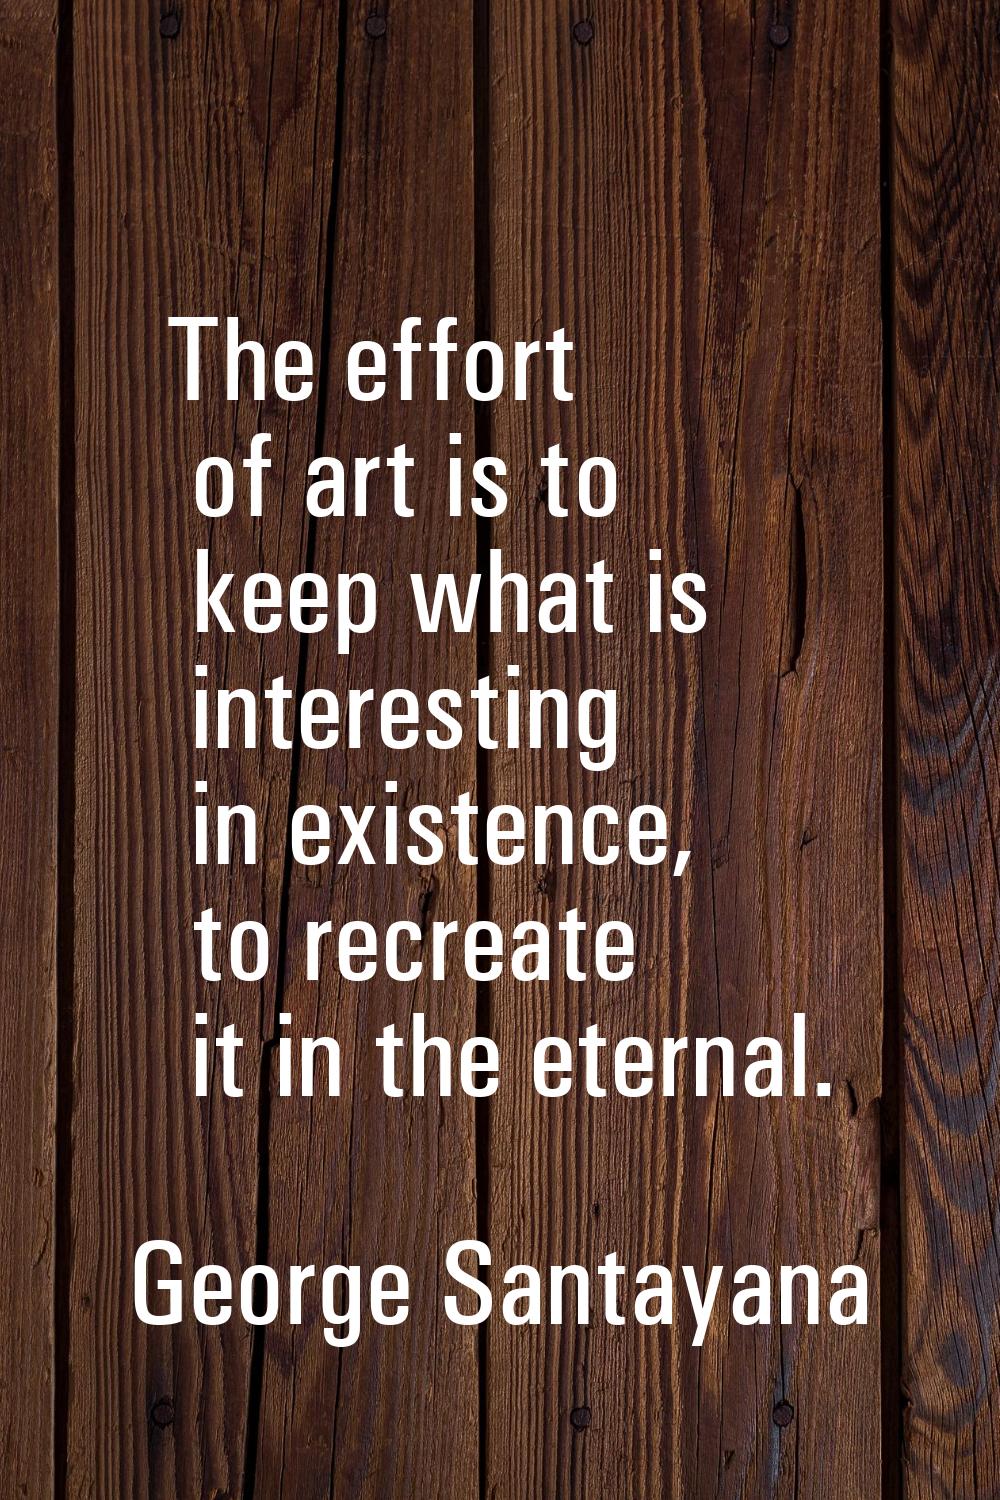 The effort of art is to keep what is interesting in existence, to recreate it in the eternal.